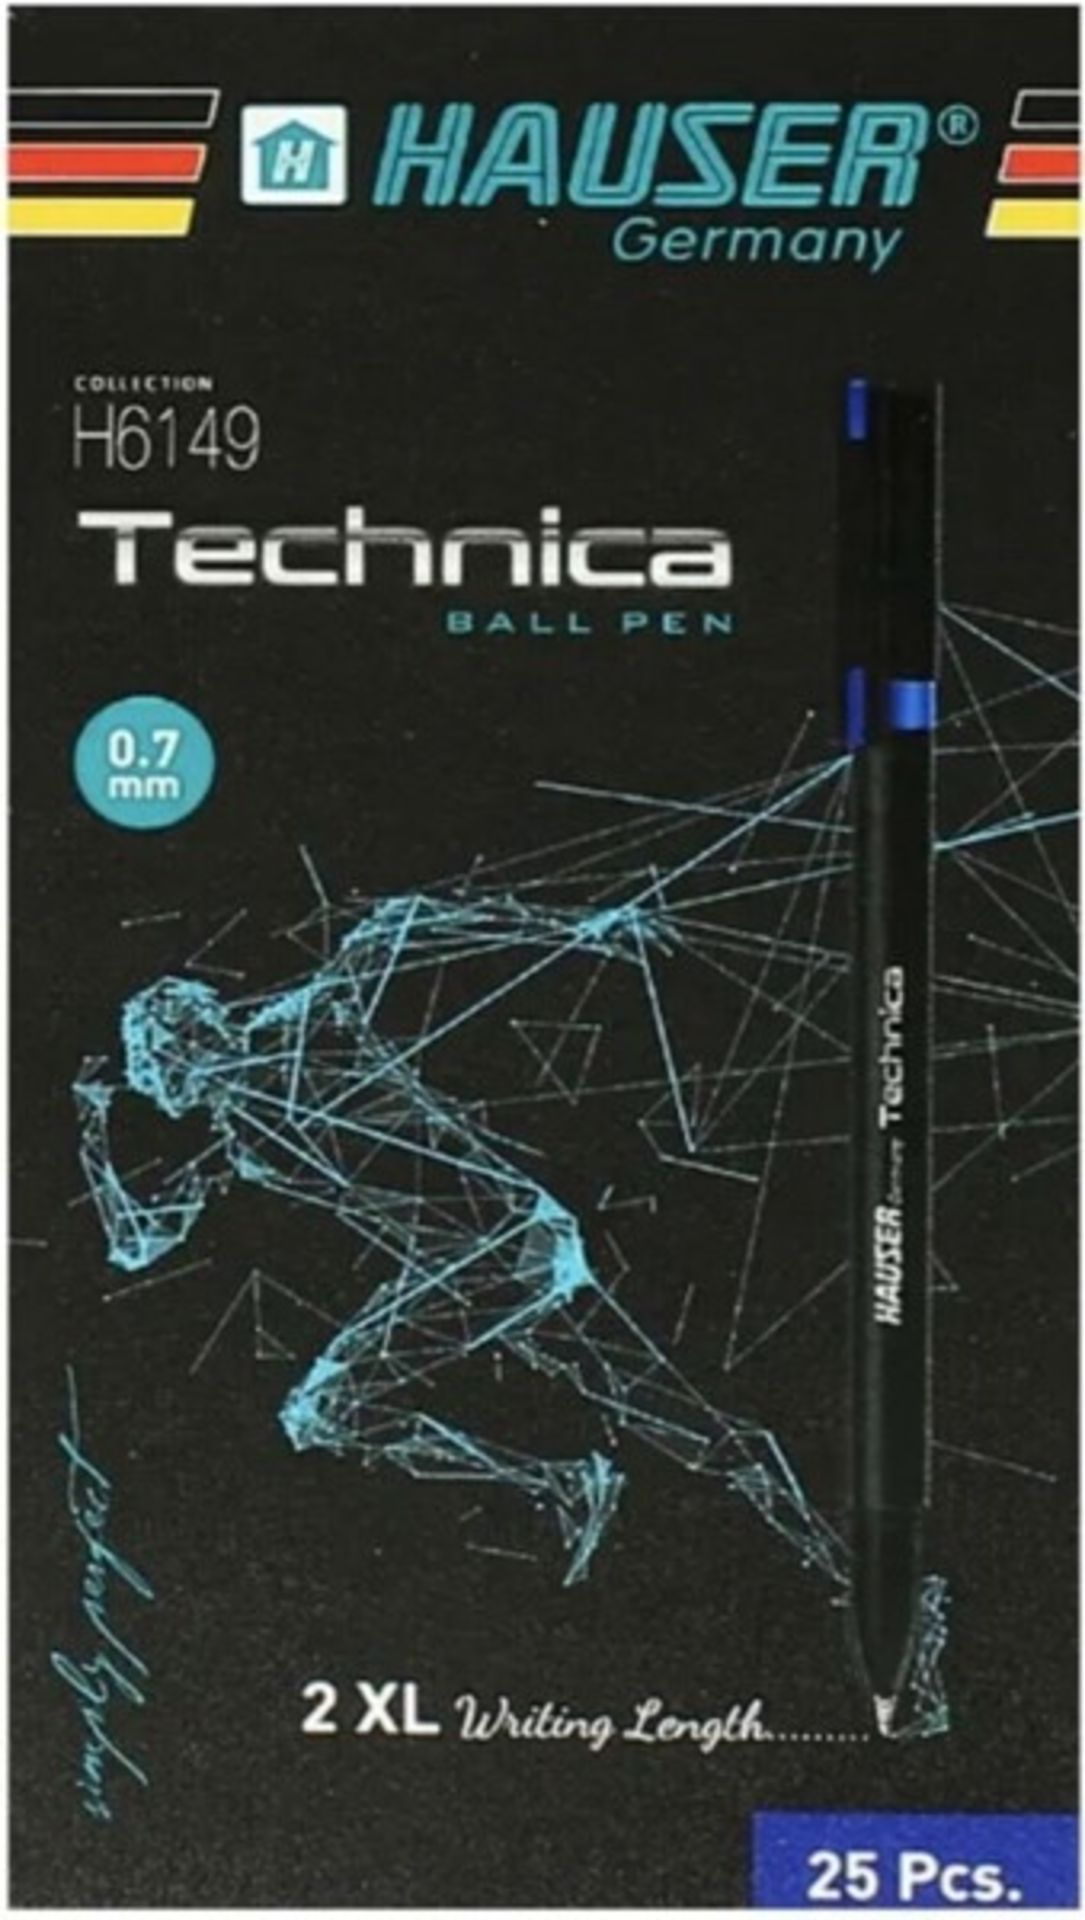 1000 x Hauser Germany Technica Ball Point Pens